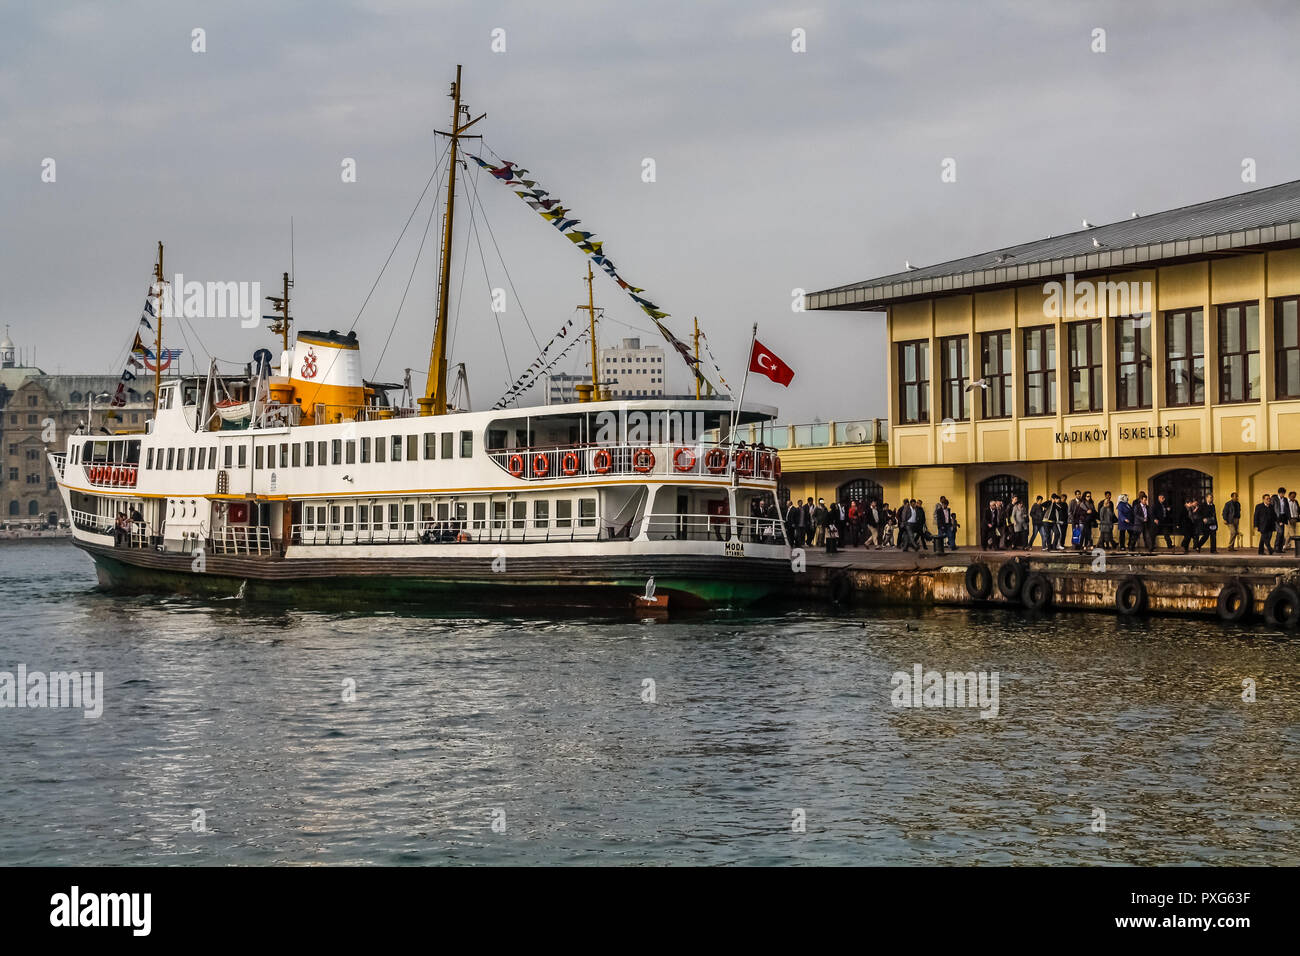 Passengers disembarking from a ferry at the Kadikoy Ferry Port, Istanbul. Stock Photo